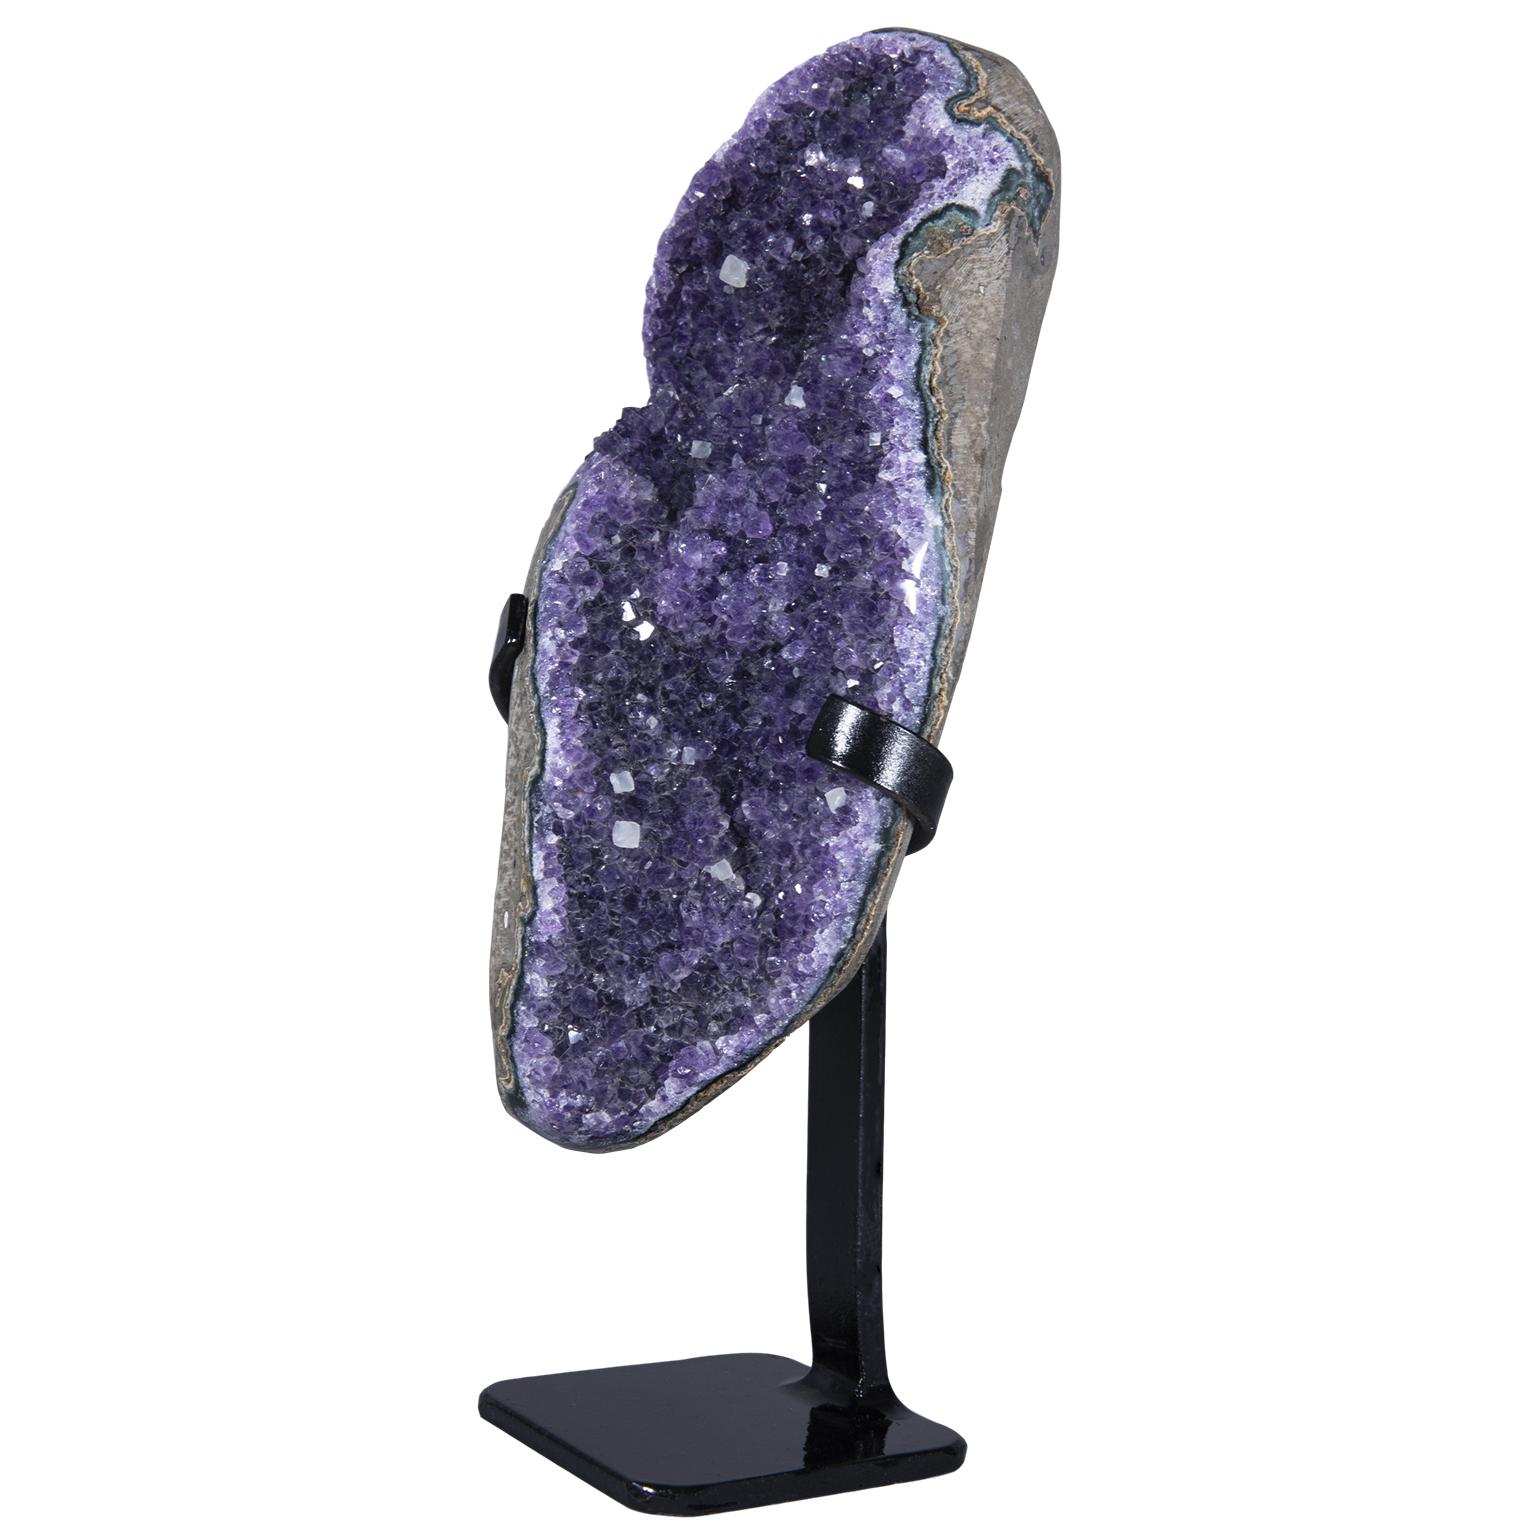 18th Century and Earlier Amethyst Sculpture with Calcite Crystals